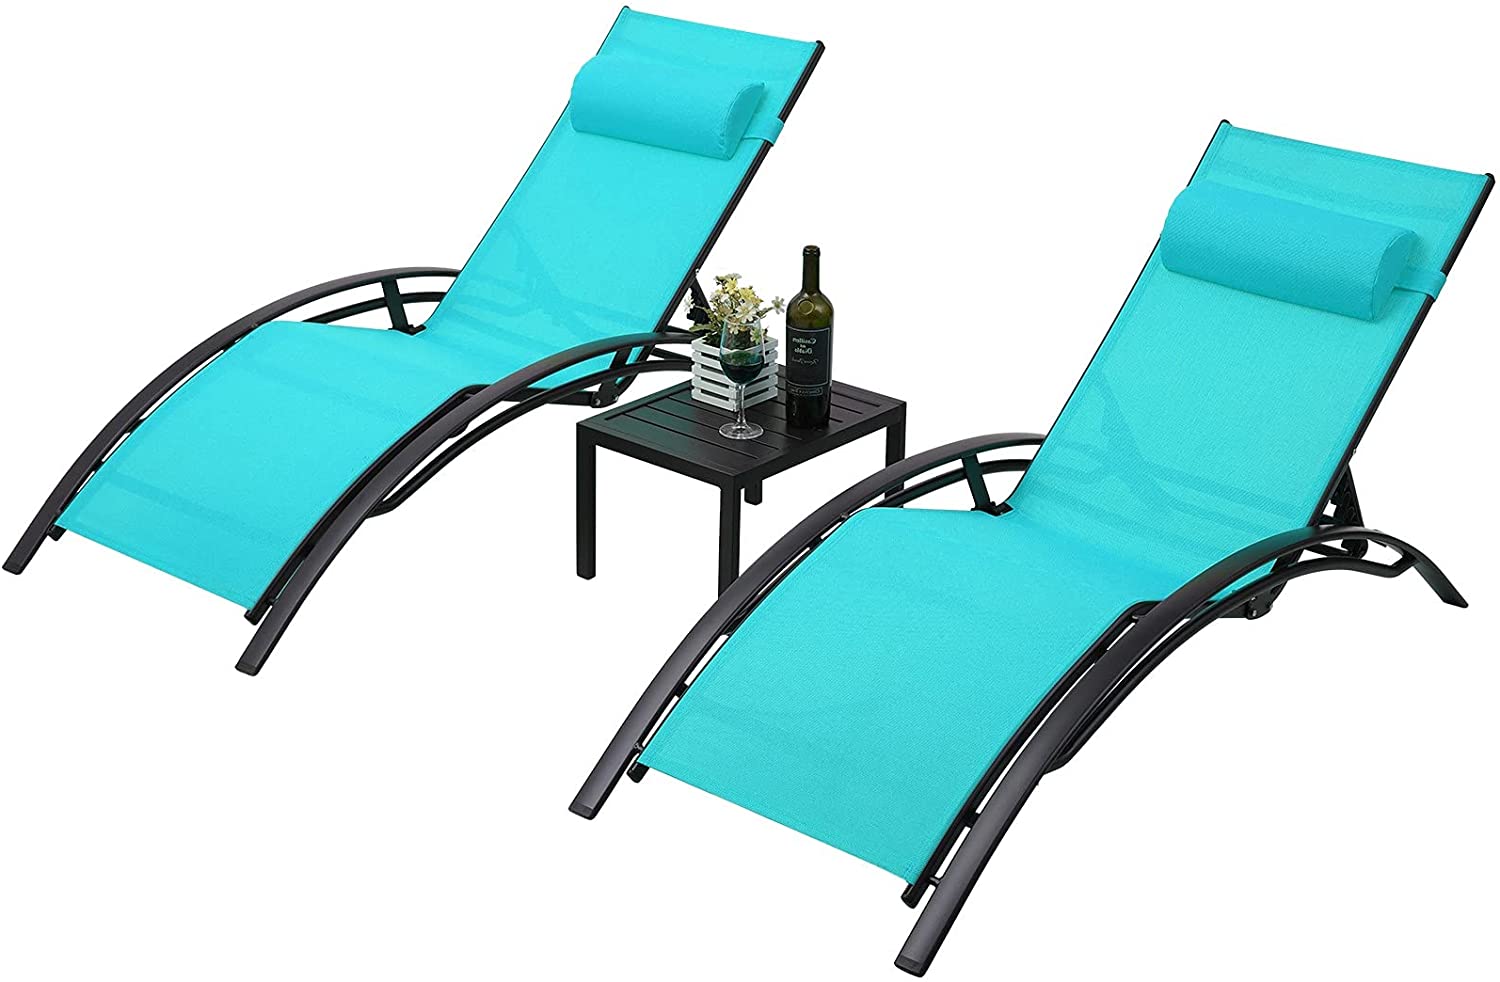 Increkid Patio Lounge Chairs Adjustable Pool Chaise Lounge Chairs with Table - image 1 of 9